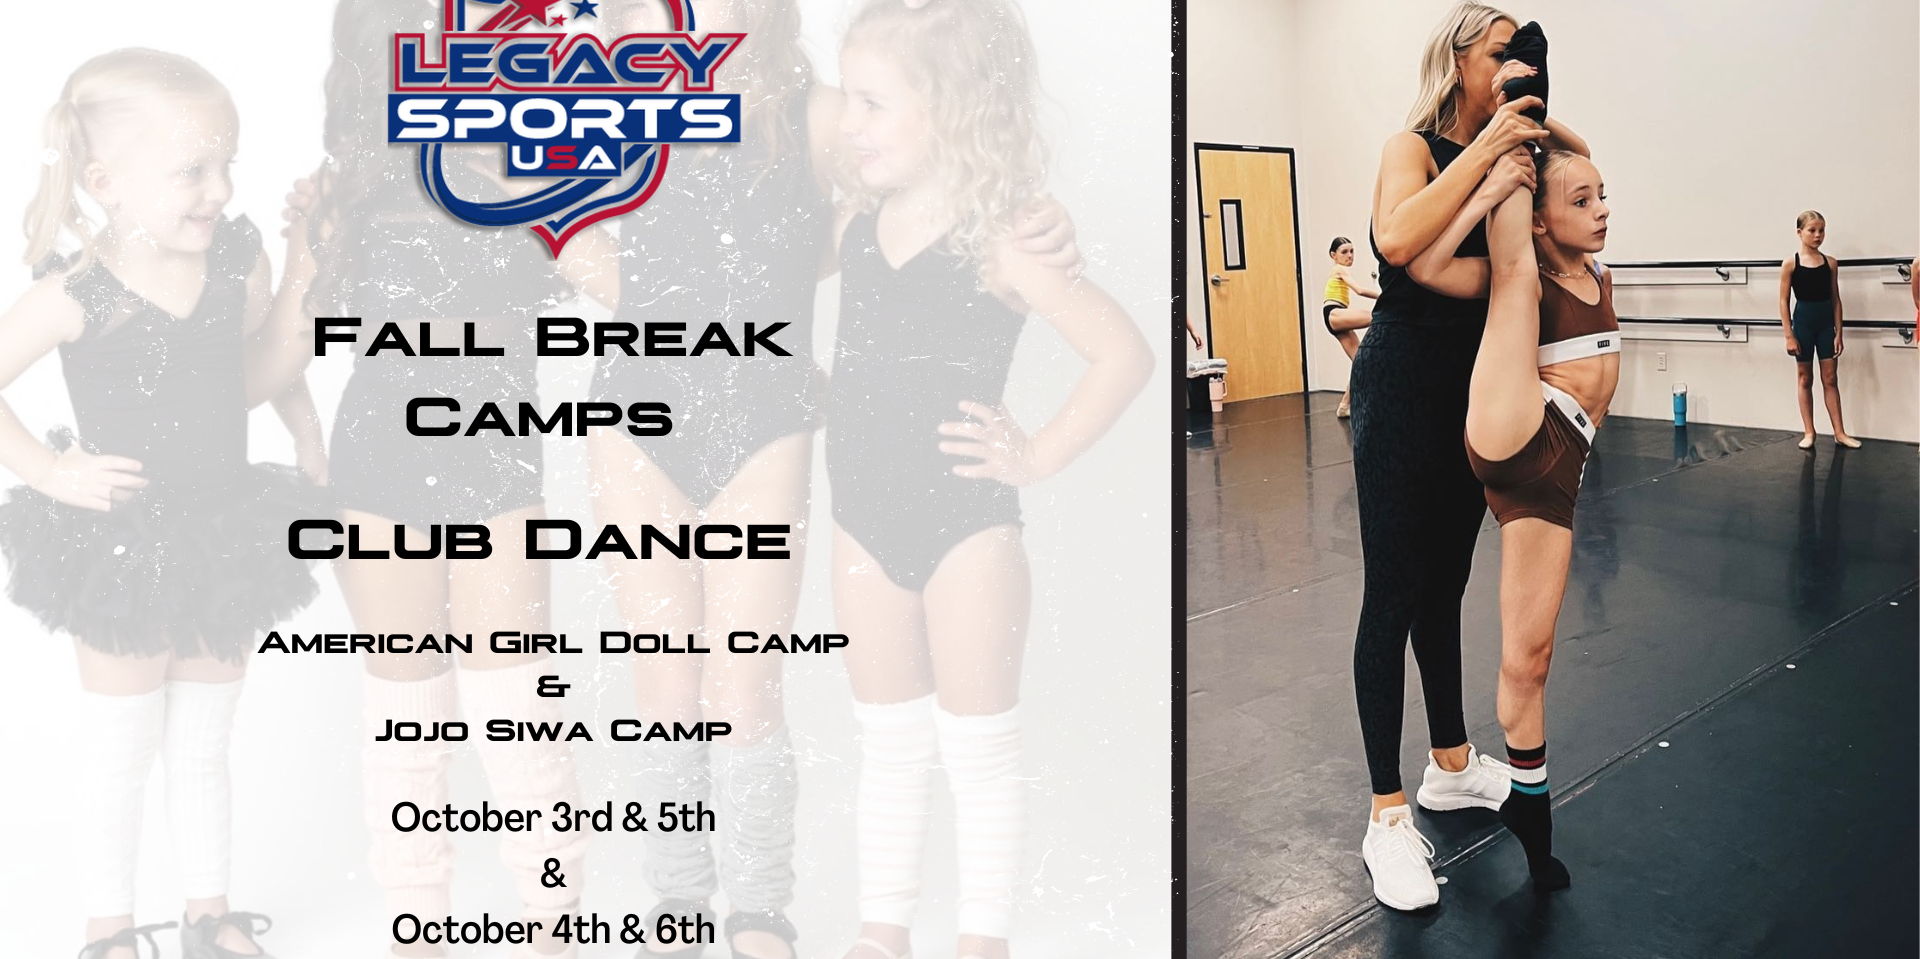 Club Dance Fall Break Camps promotional image